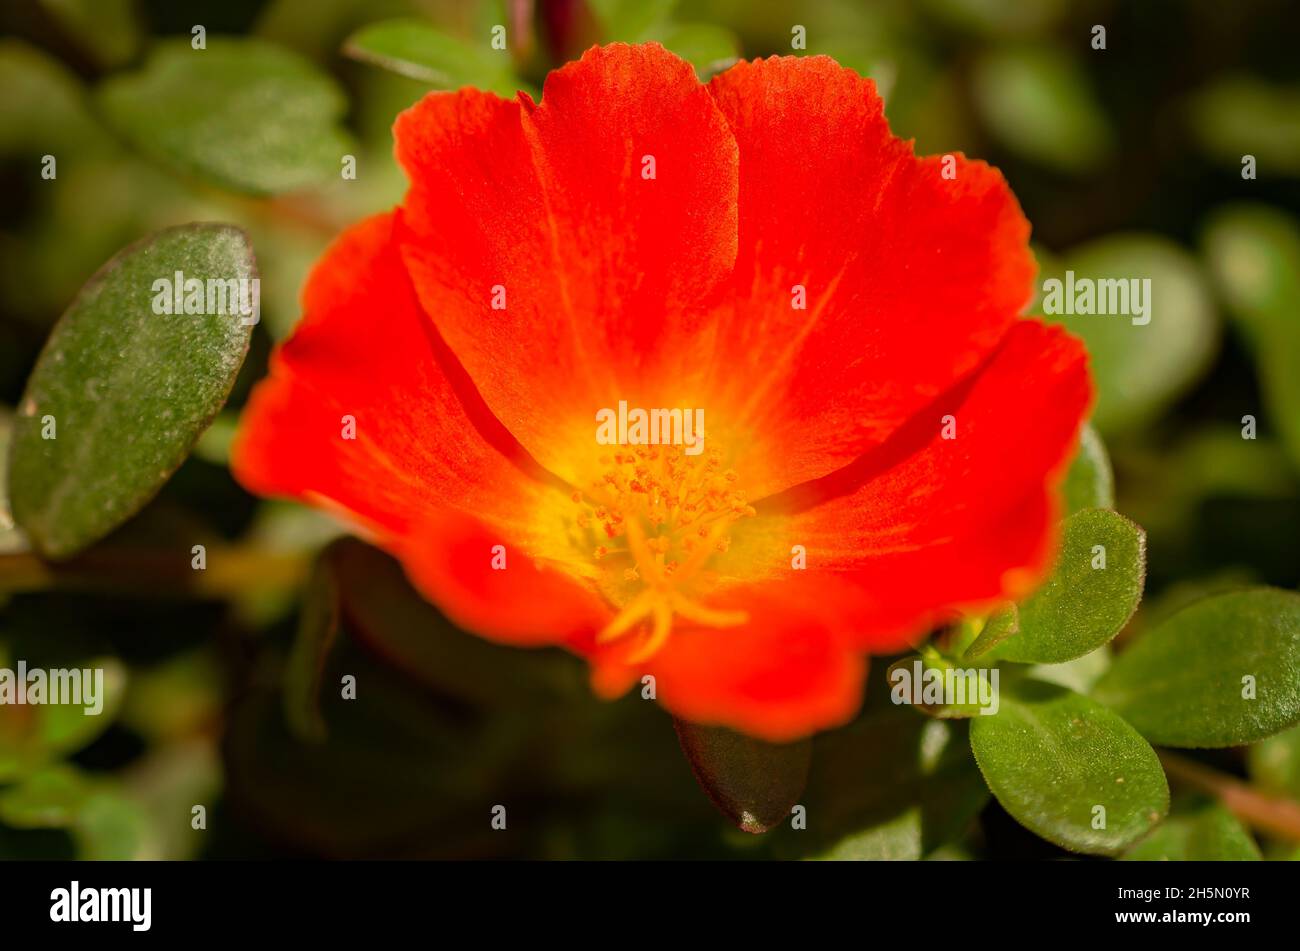 An orange purslane (Portulaca umbraticola) is pictured, May 15, 2016, in Coden, Alabama. The purslane is a perennial succulent. Stock Photo